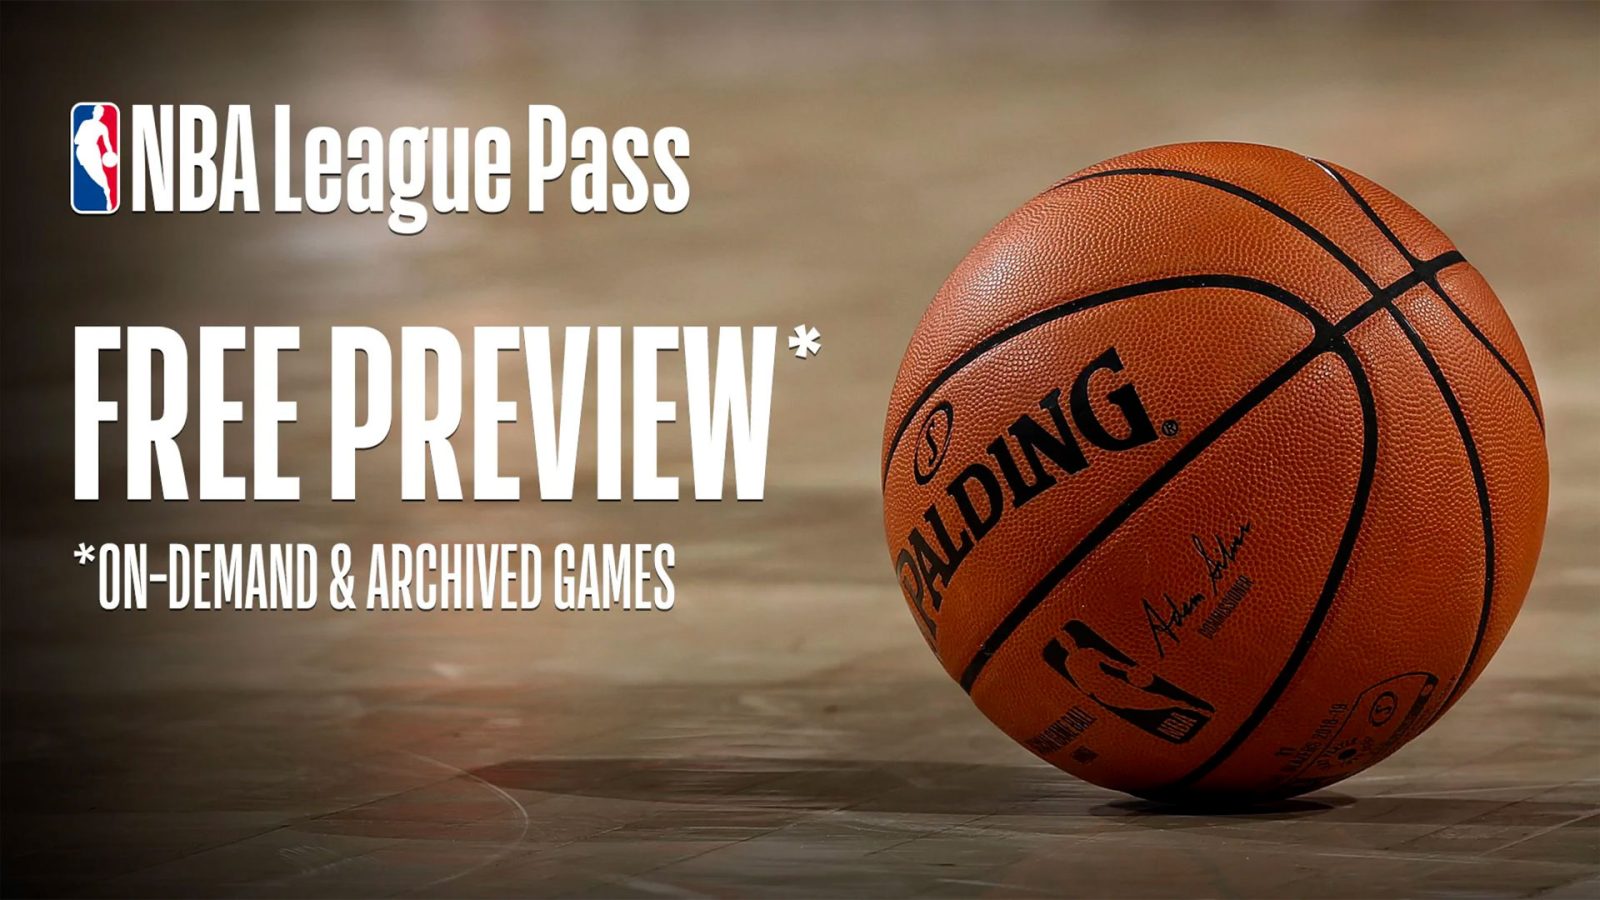 Catch up on previous NBA games and more with this FREE preview of